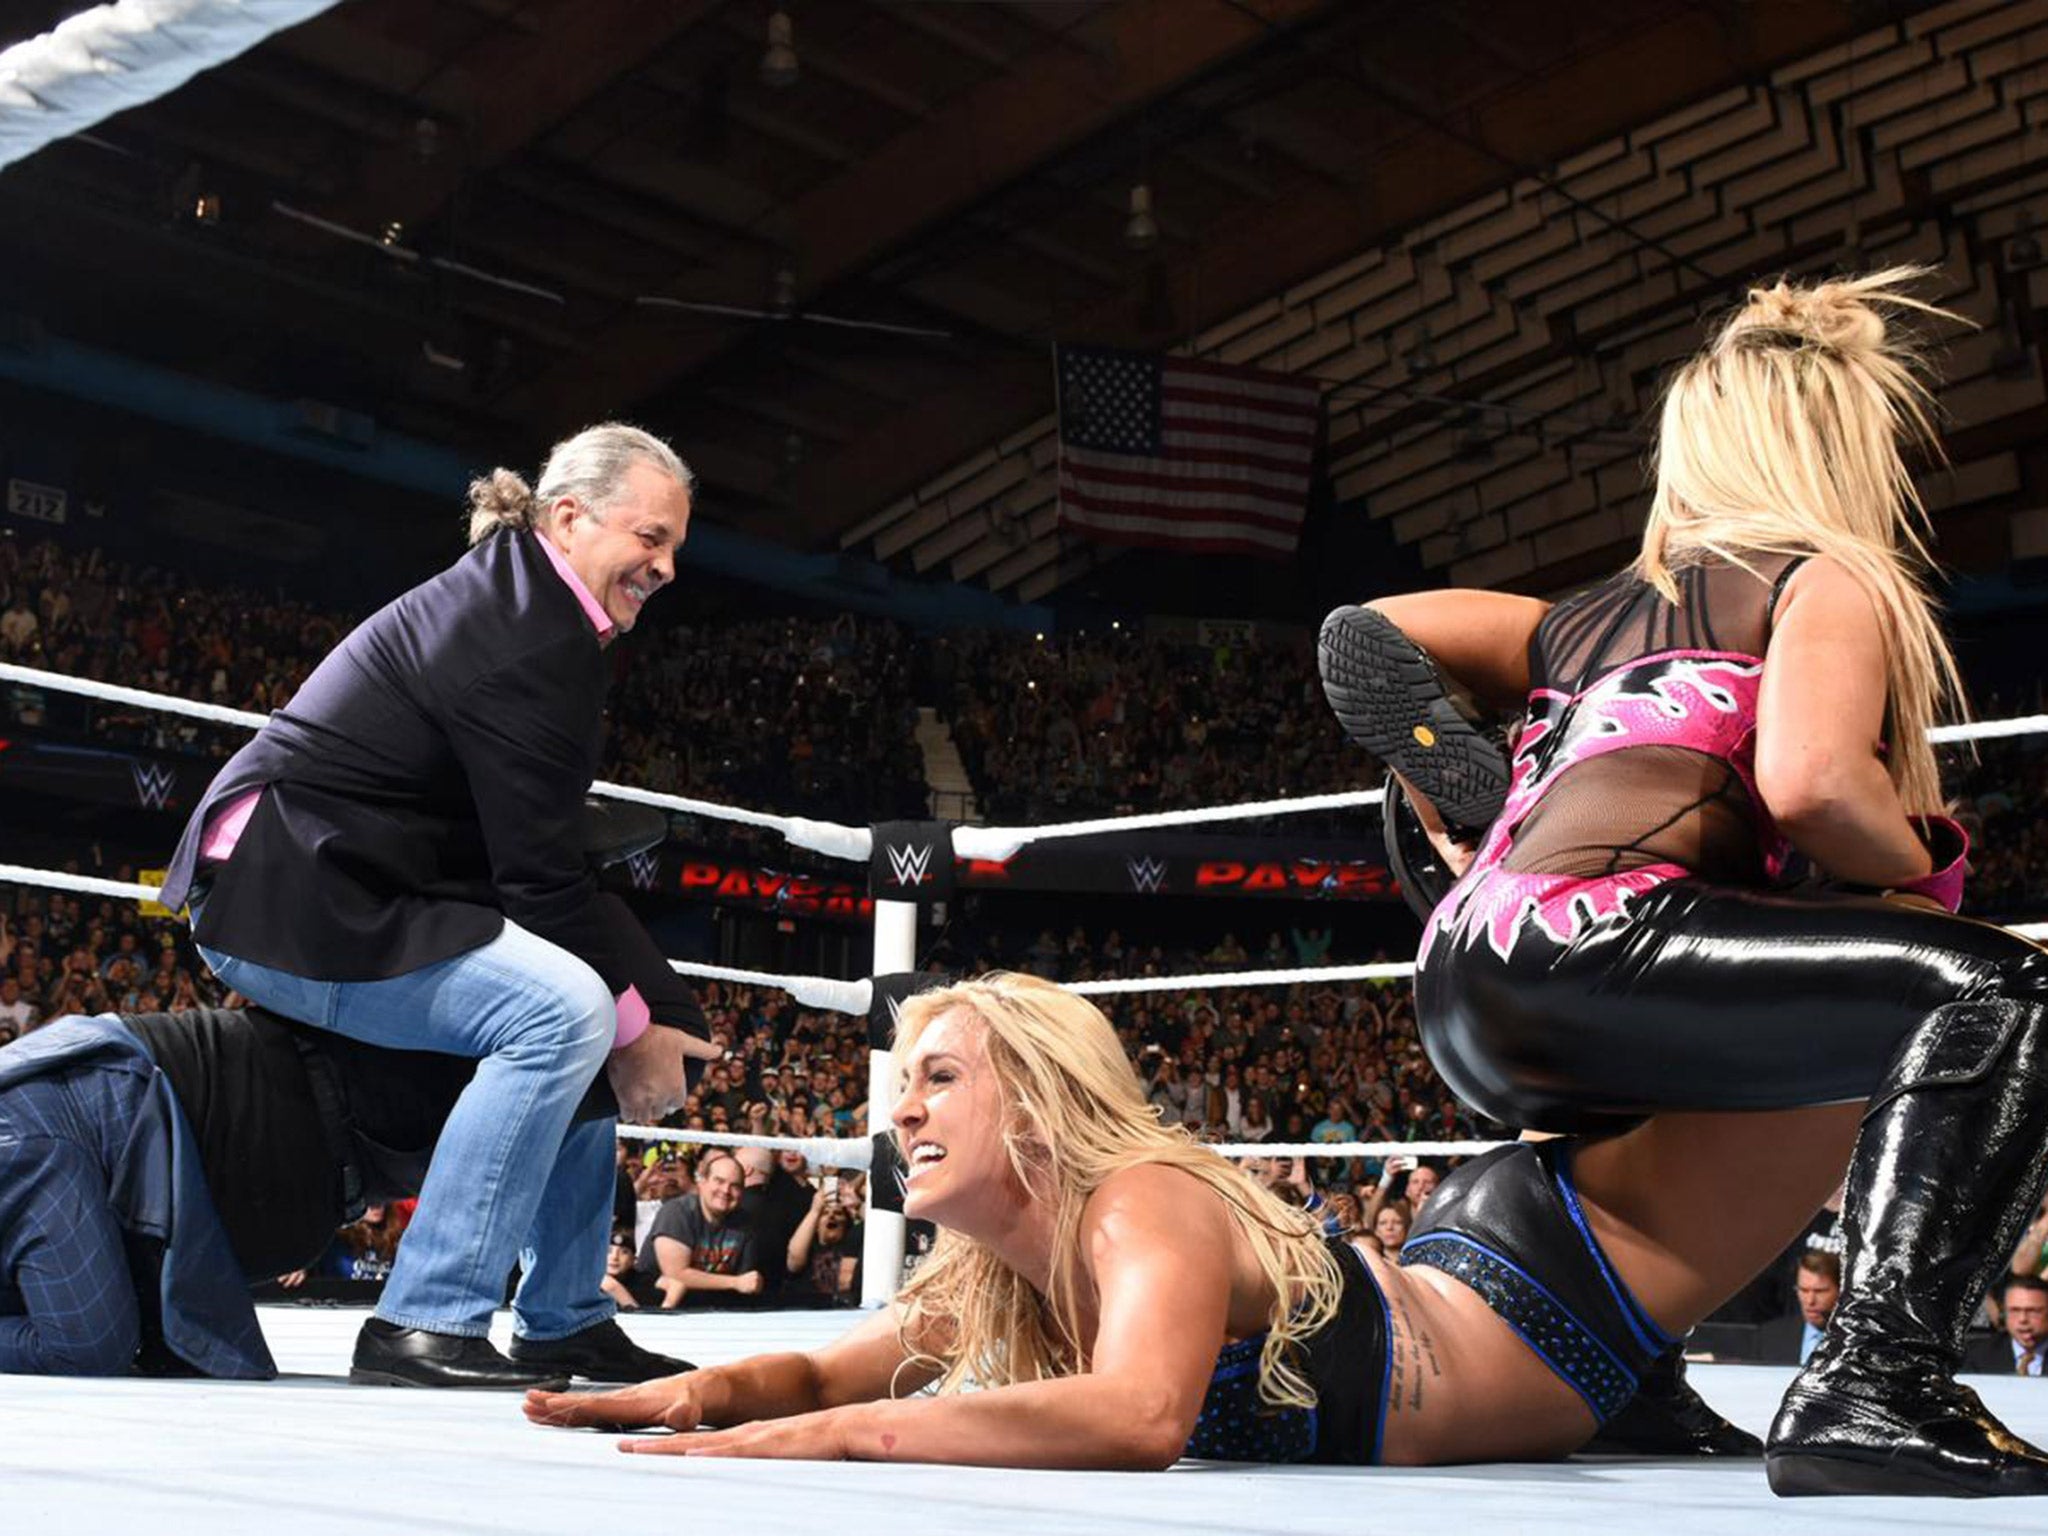 Bret Hart and Natalya lock Charlotte and Ric Flair in the Sharpshooter